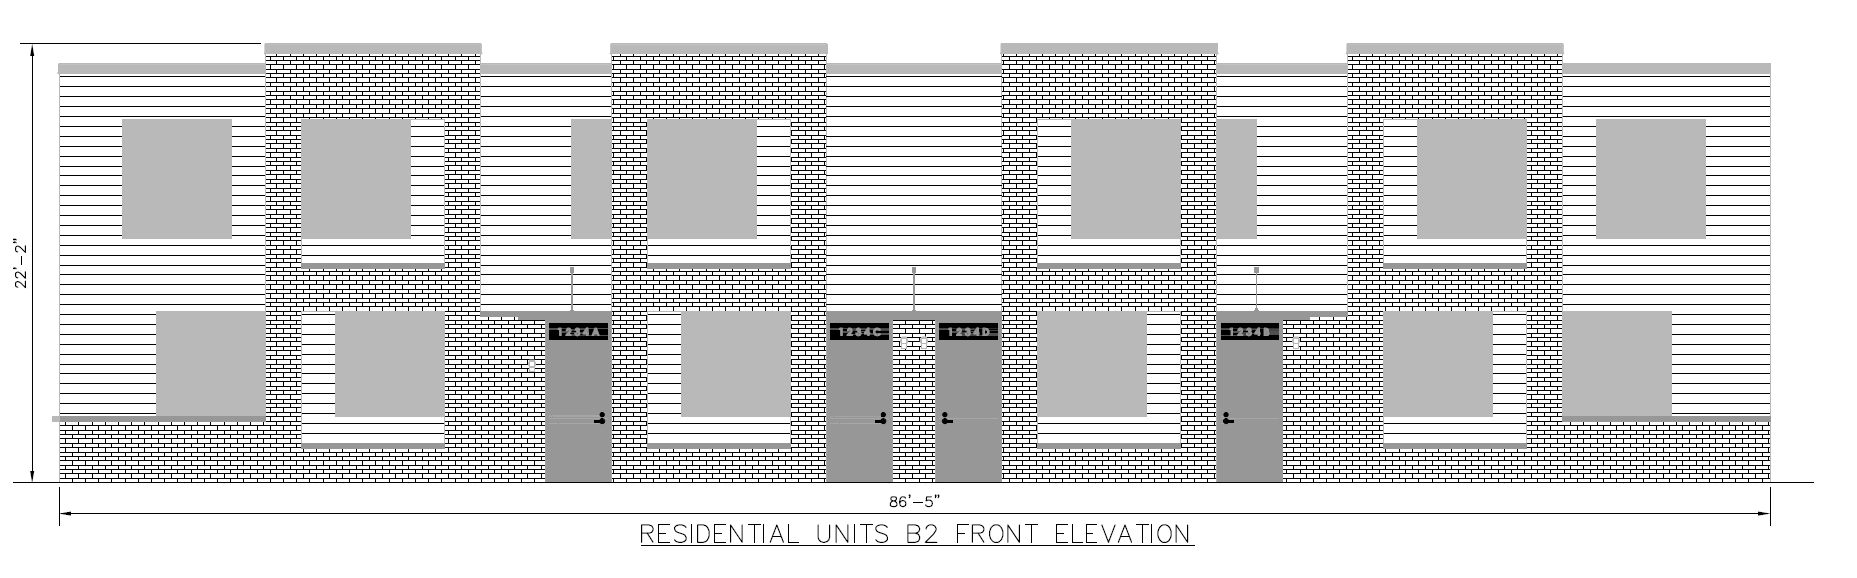 2301 Sharswood Street and 2302 Sharswood Street. Building elevations. Credit: Blackney Hayes Architects and KS Engineers, P.C. via the City of Philadelphia